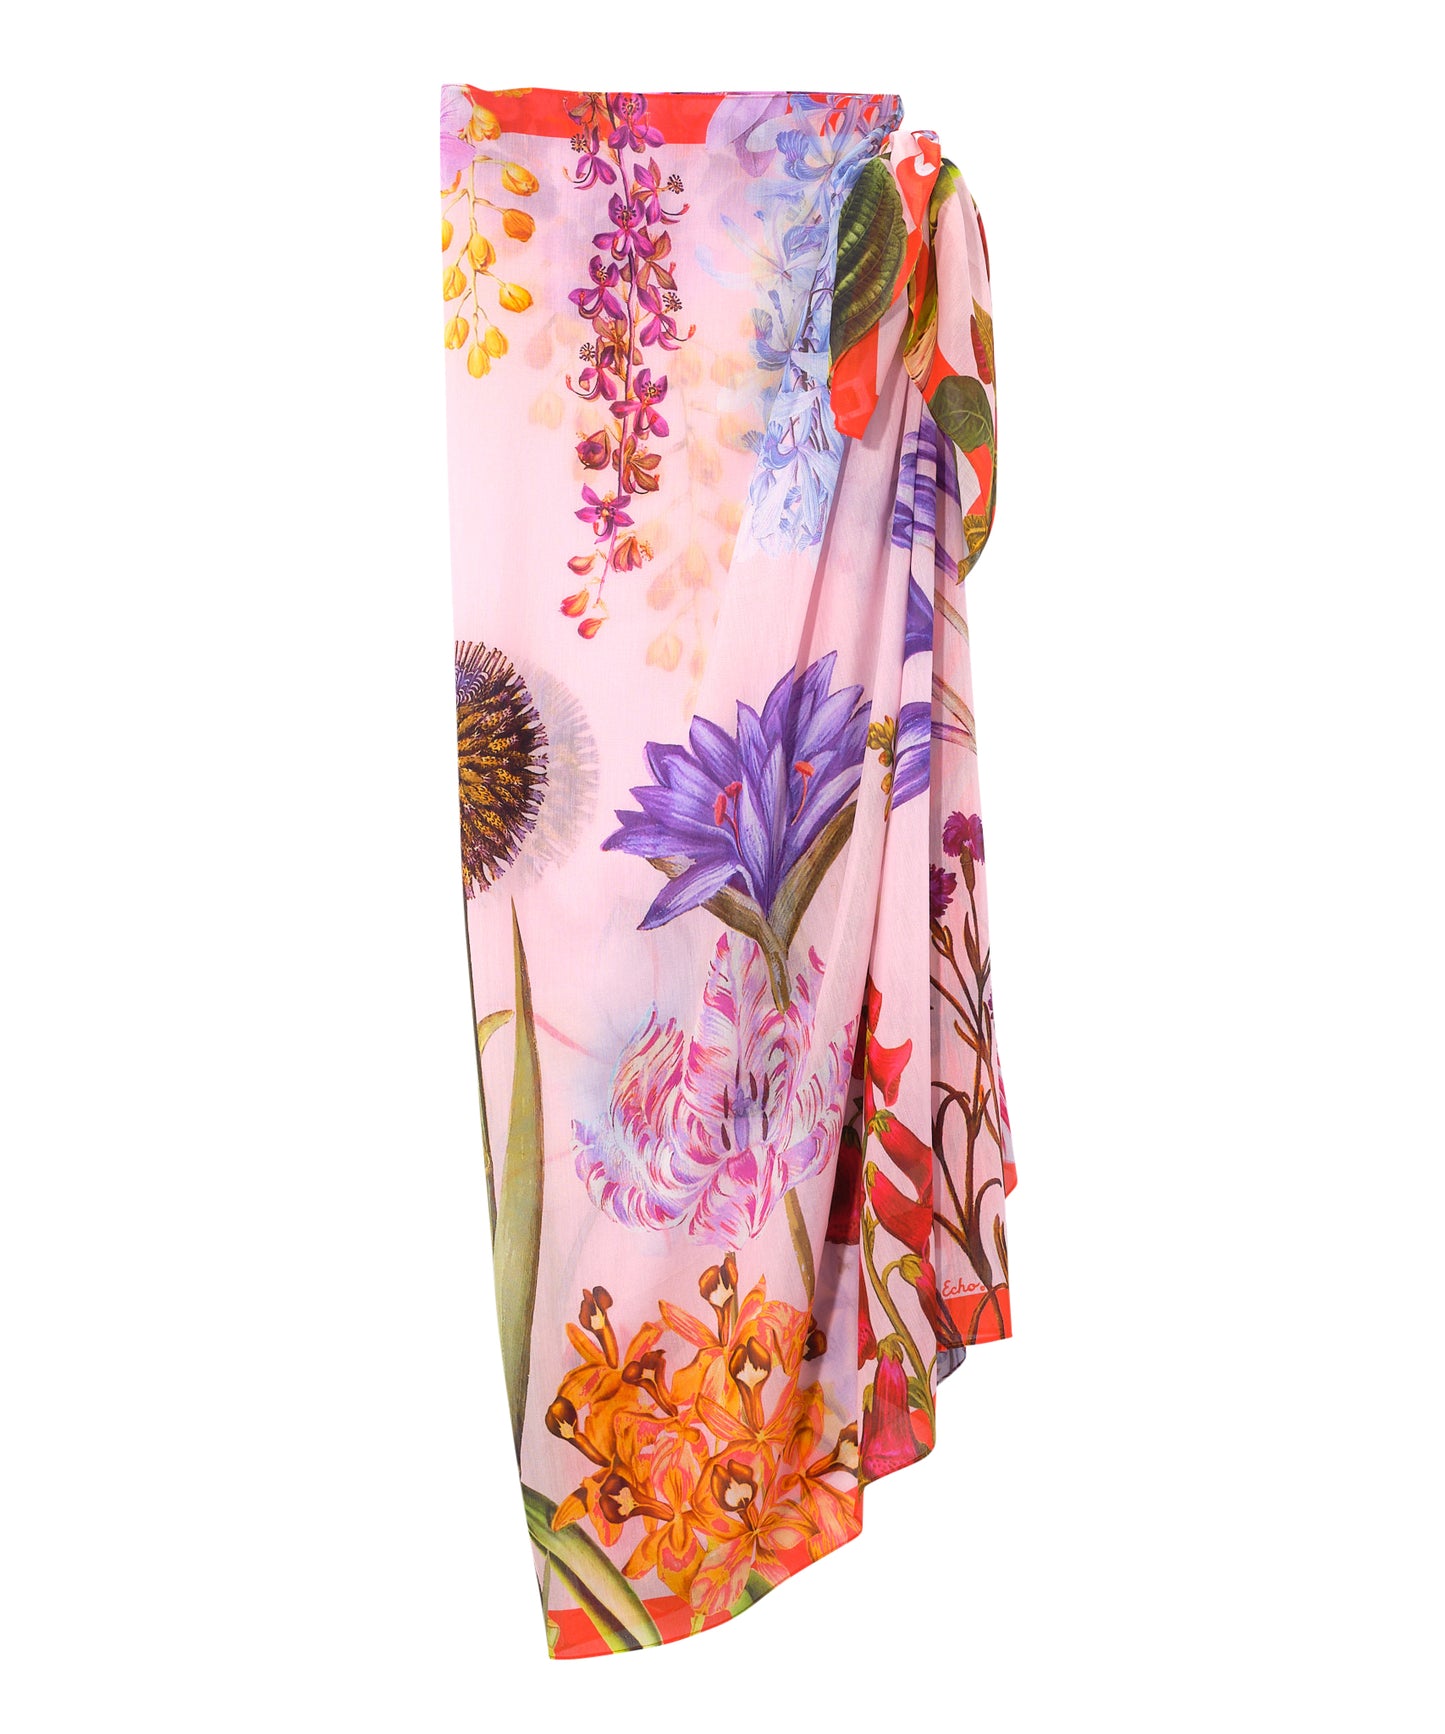 The Botanica Sarong Scarf in color Seashell